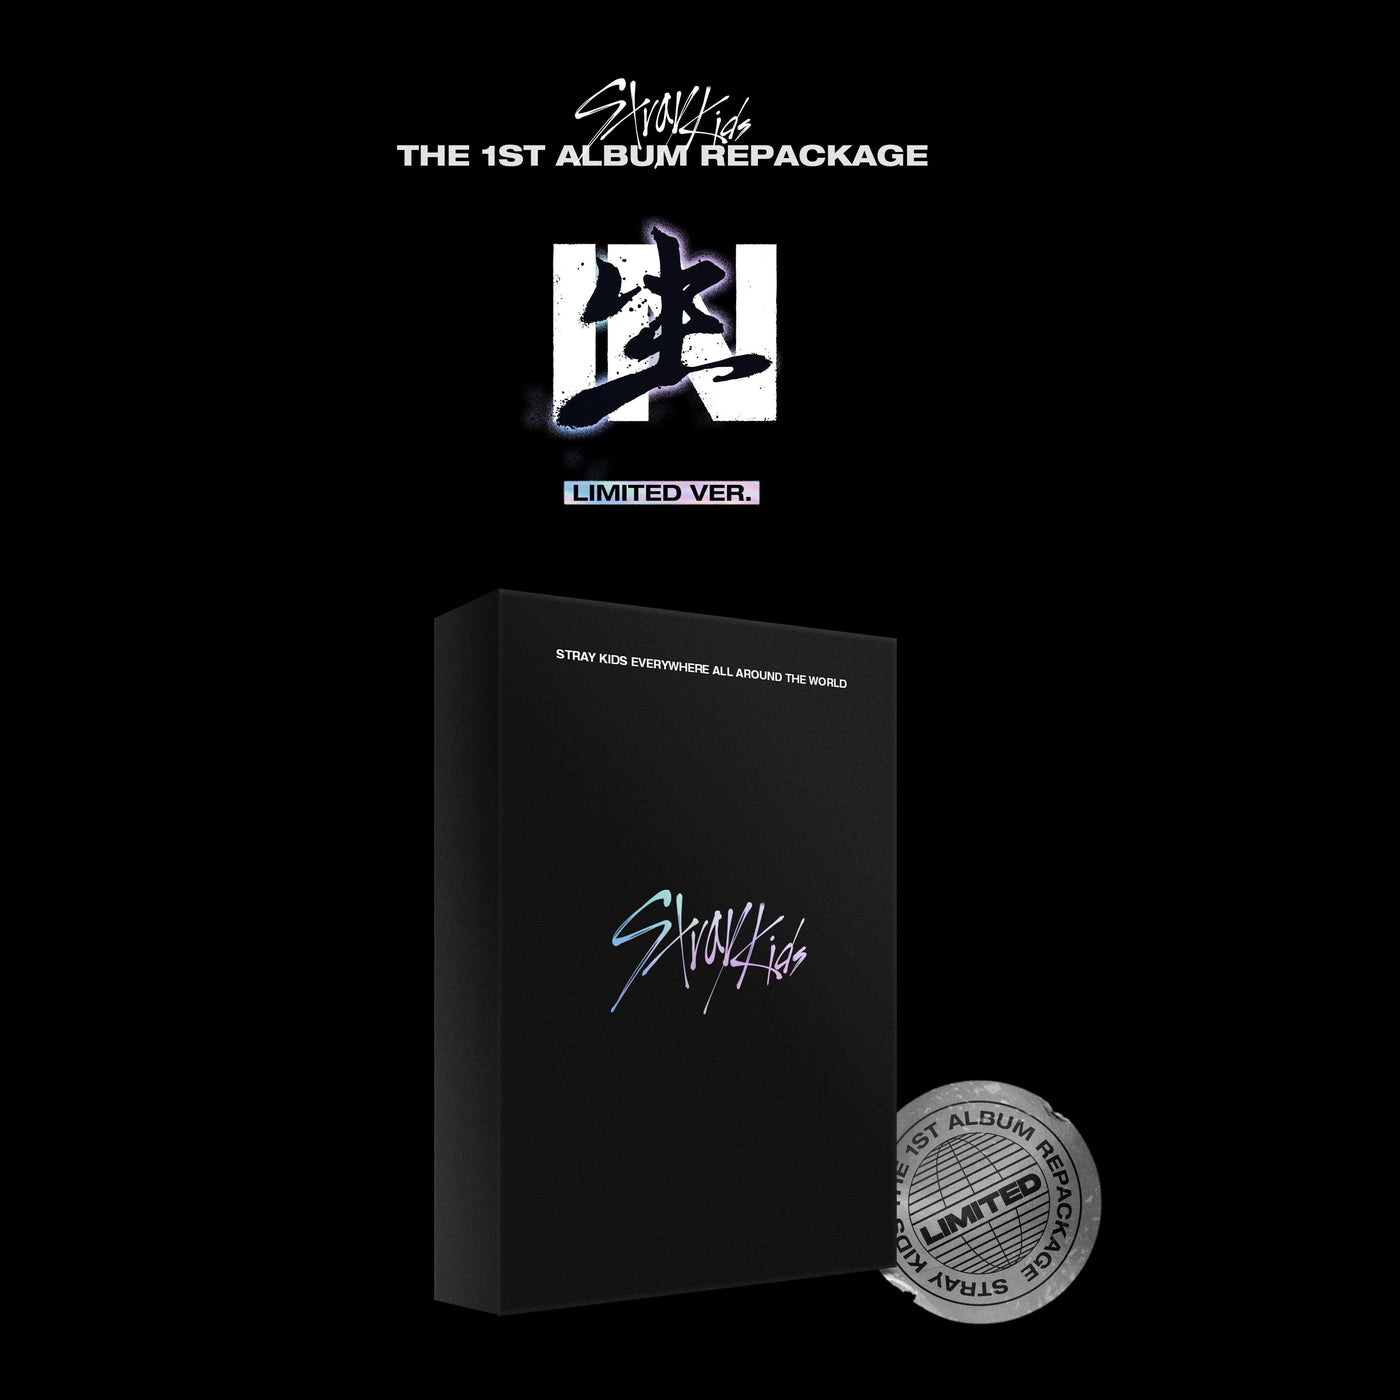 Stray Kids 1st Album Repackage - IN生 (IN LIFE) Limited Version 🇰🇷